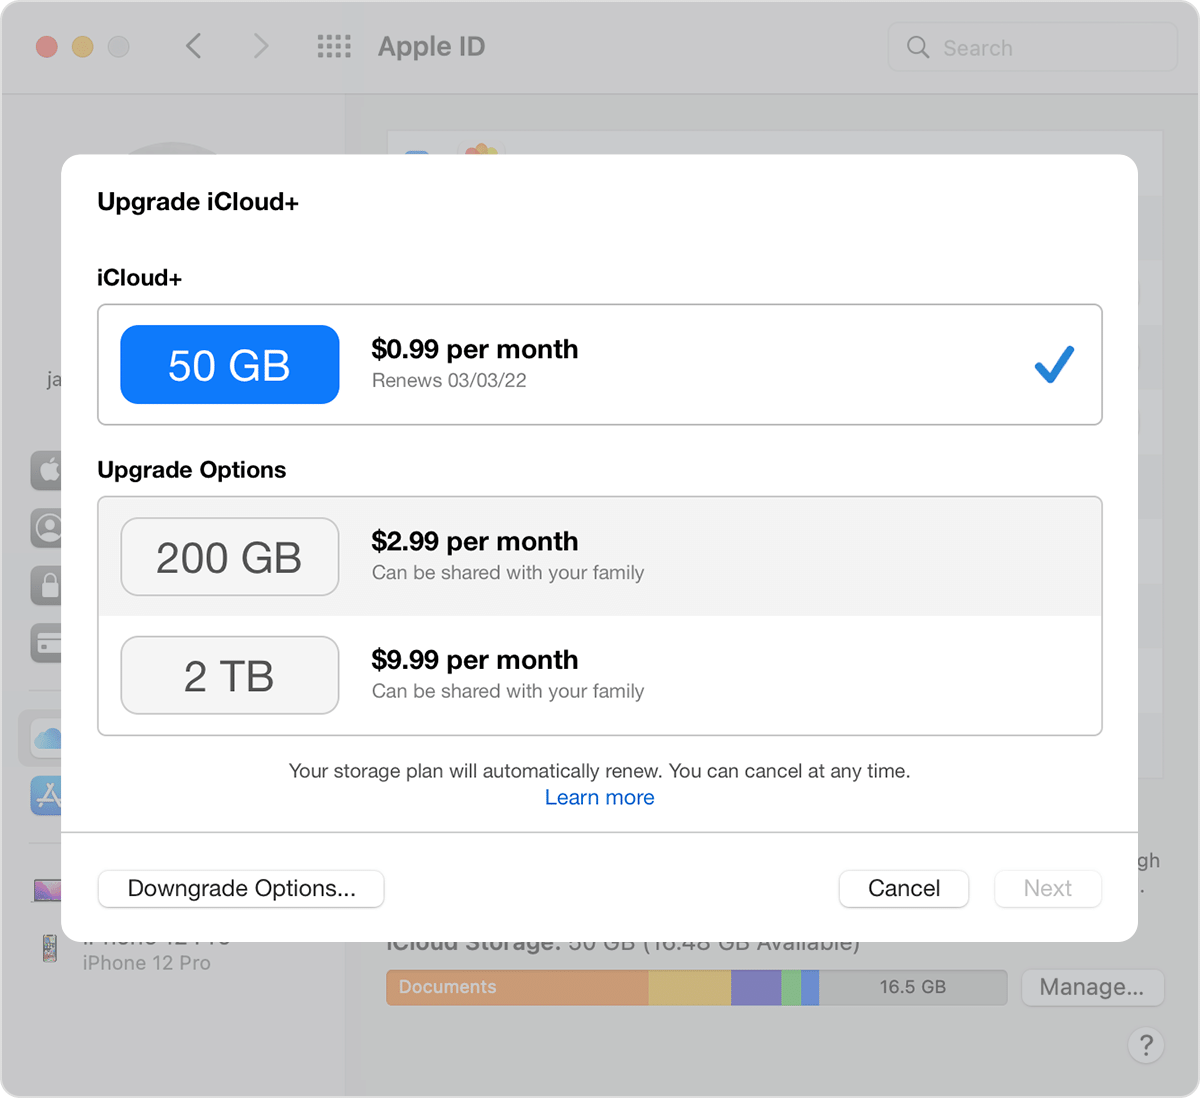 Click Downgrade Options to cancel or downgrade your storage plan on Mac